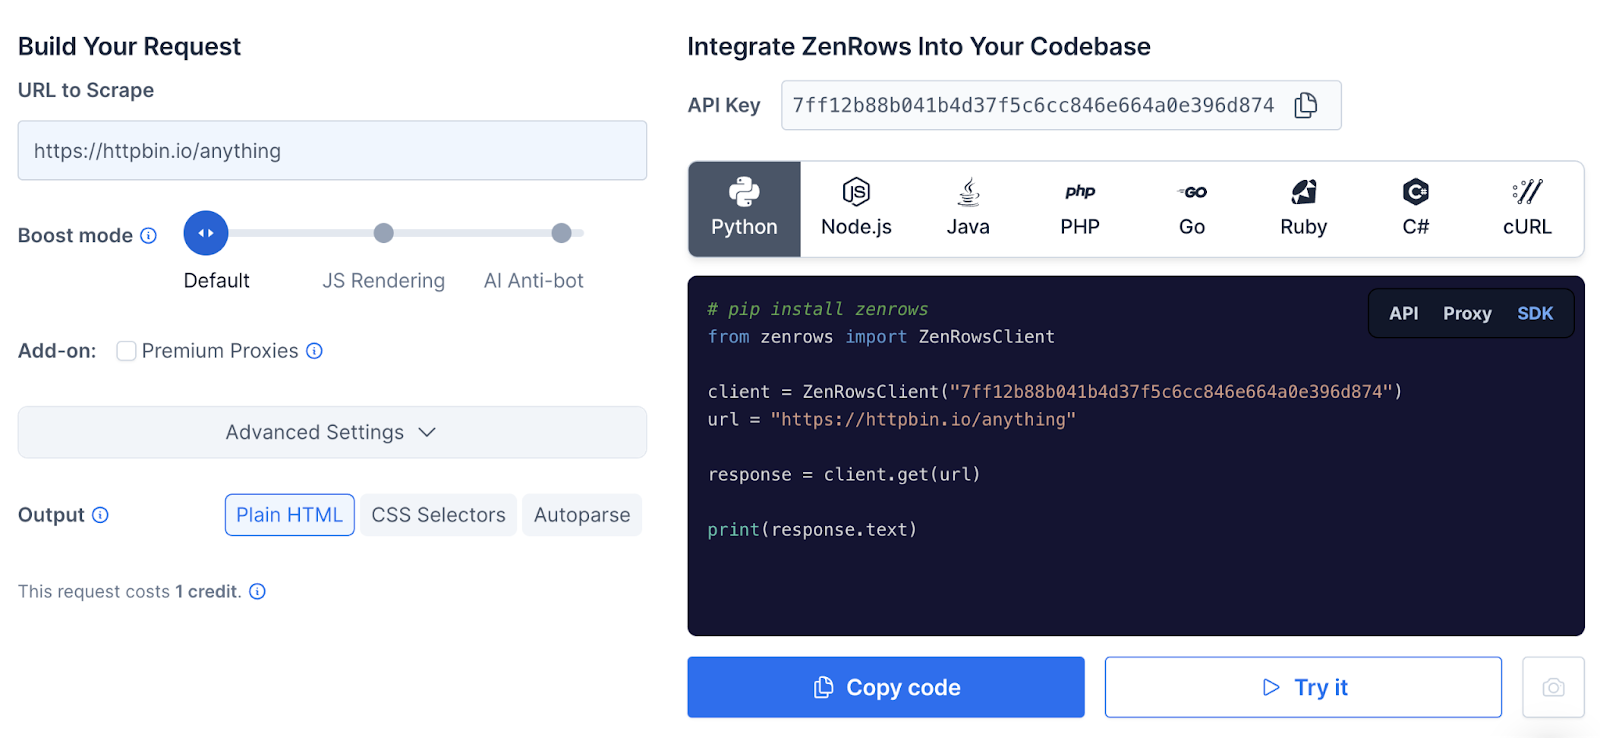 Build your request in ZenRows